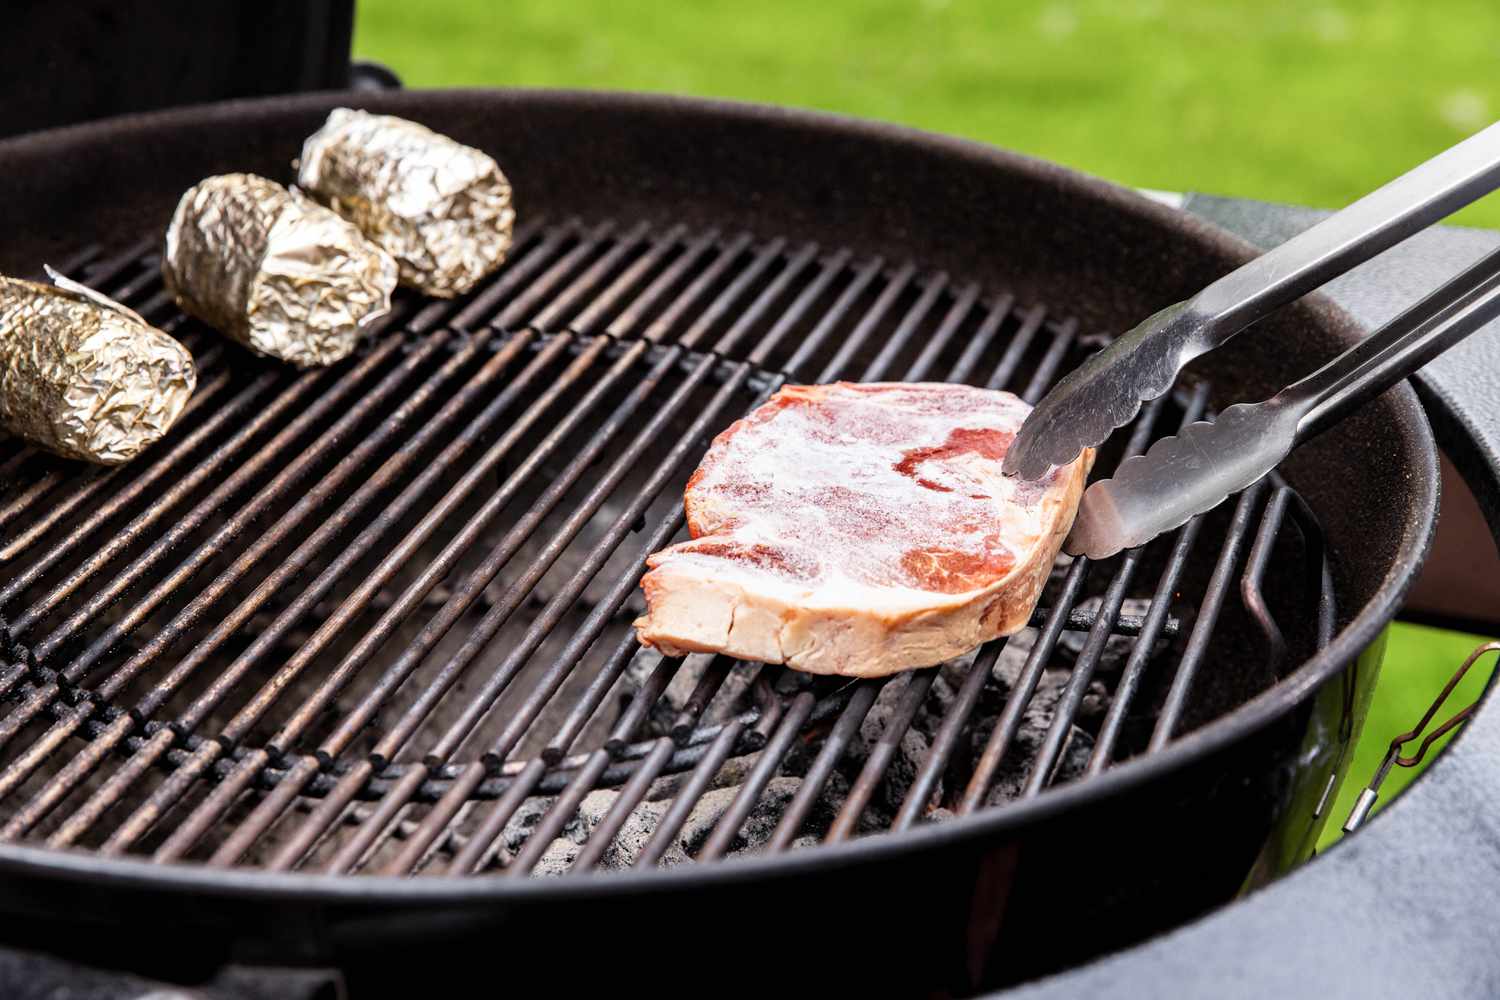 How To Cook Frozen Steak On Grill 